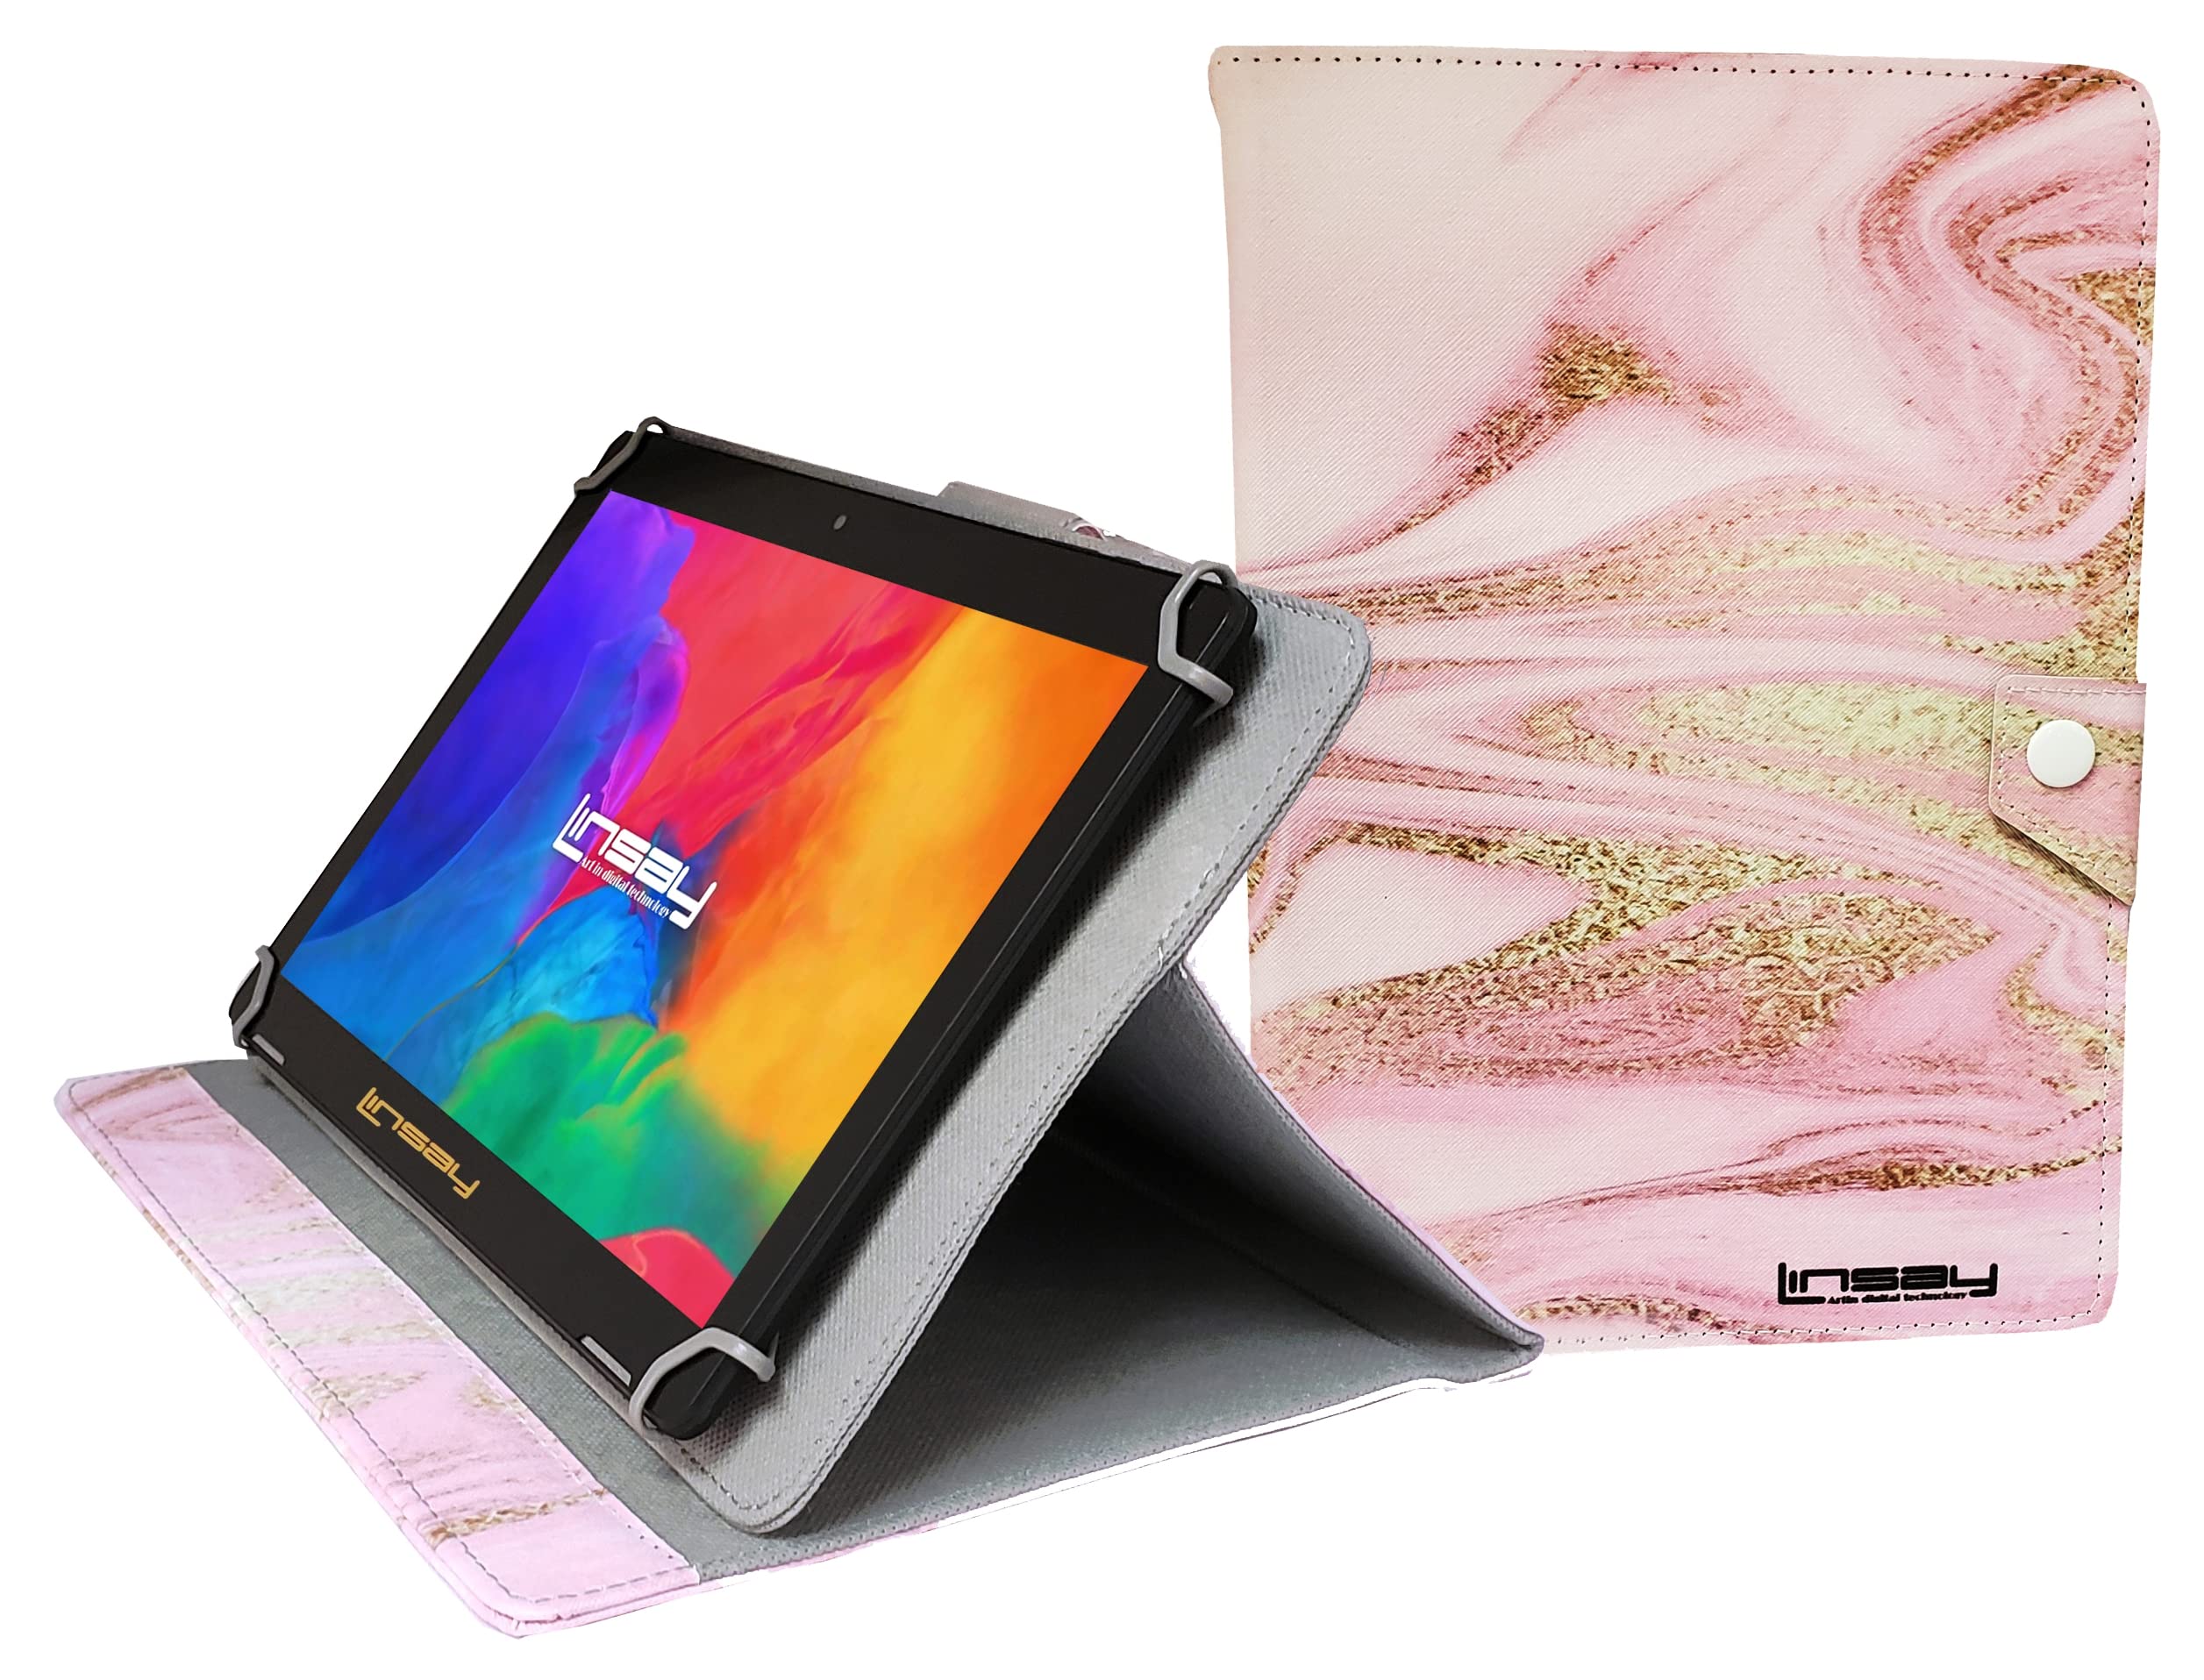 LINSAY 10.1" 1280x800 IPS 2GB RAM 32GB Android 11 Tablet with Pink Glaze Case, Pop Holder and Pen Stylus